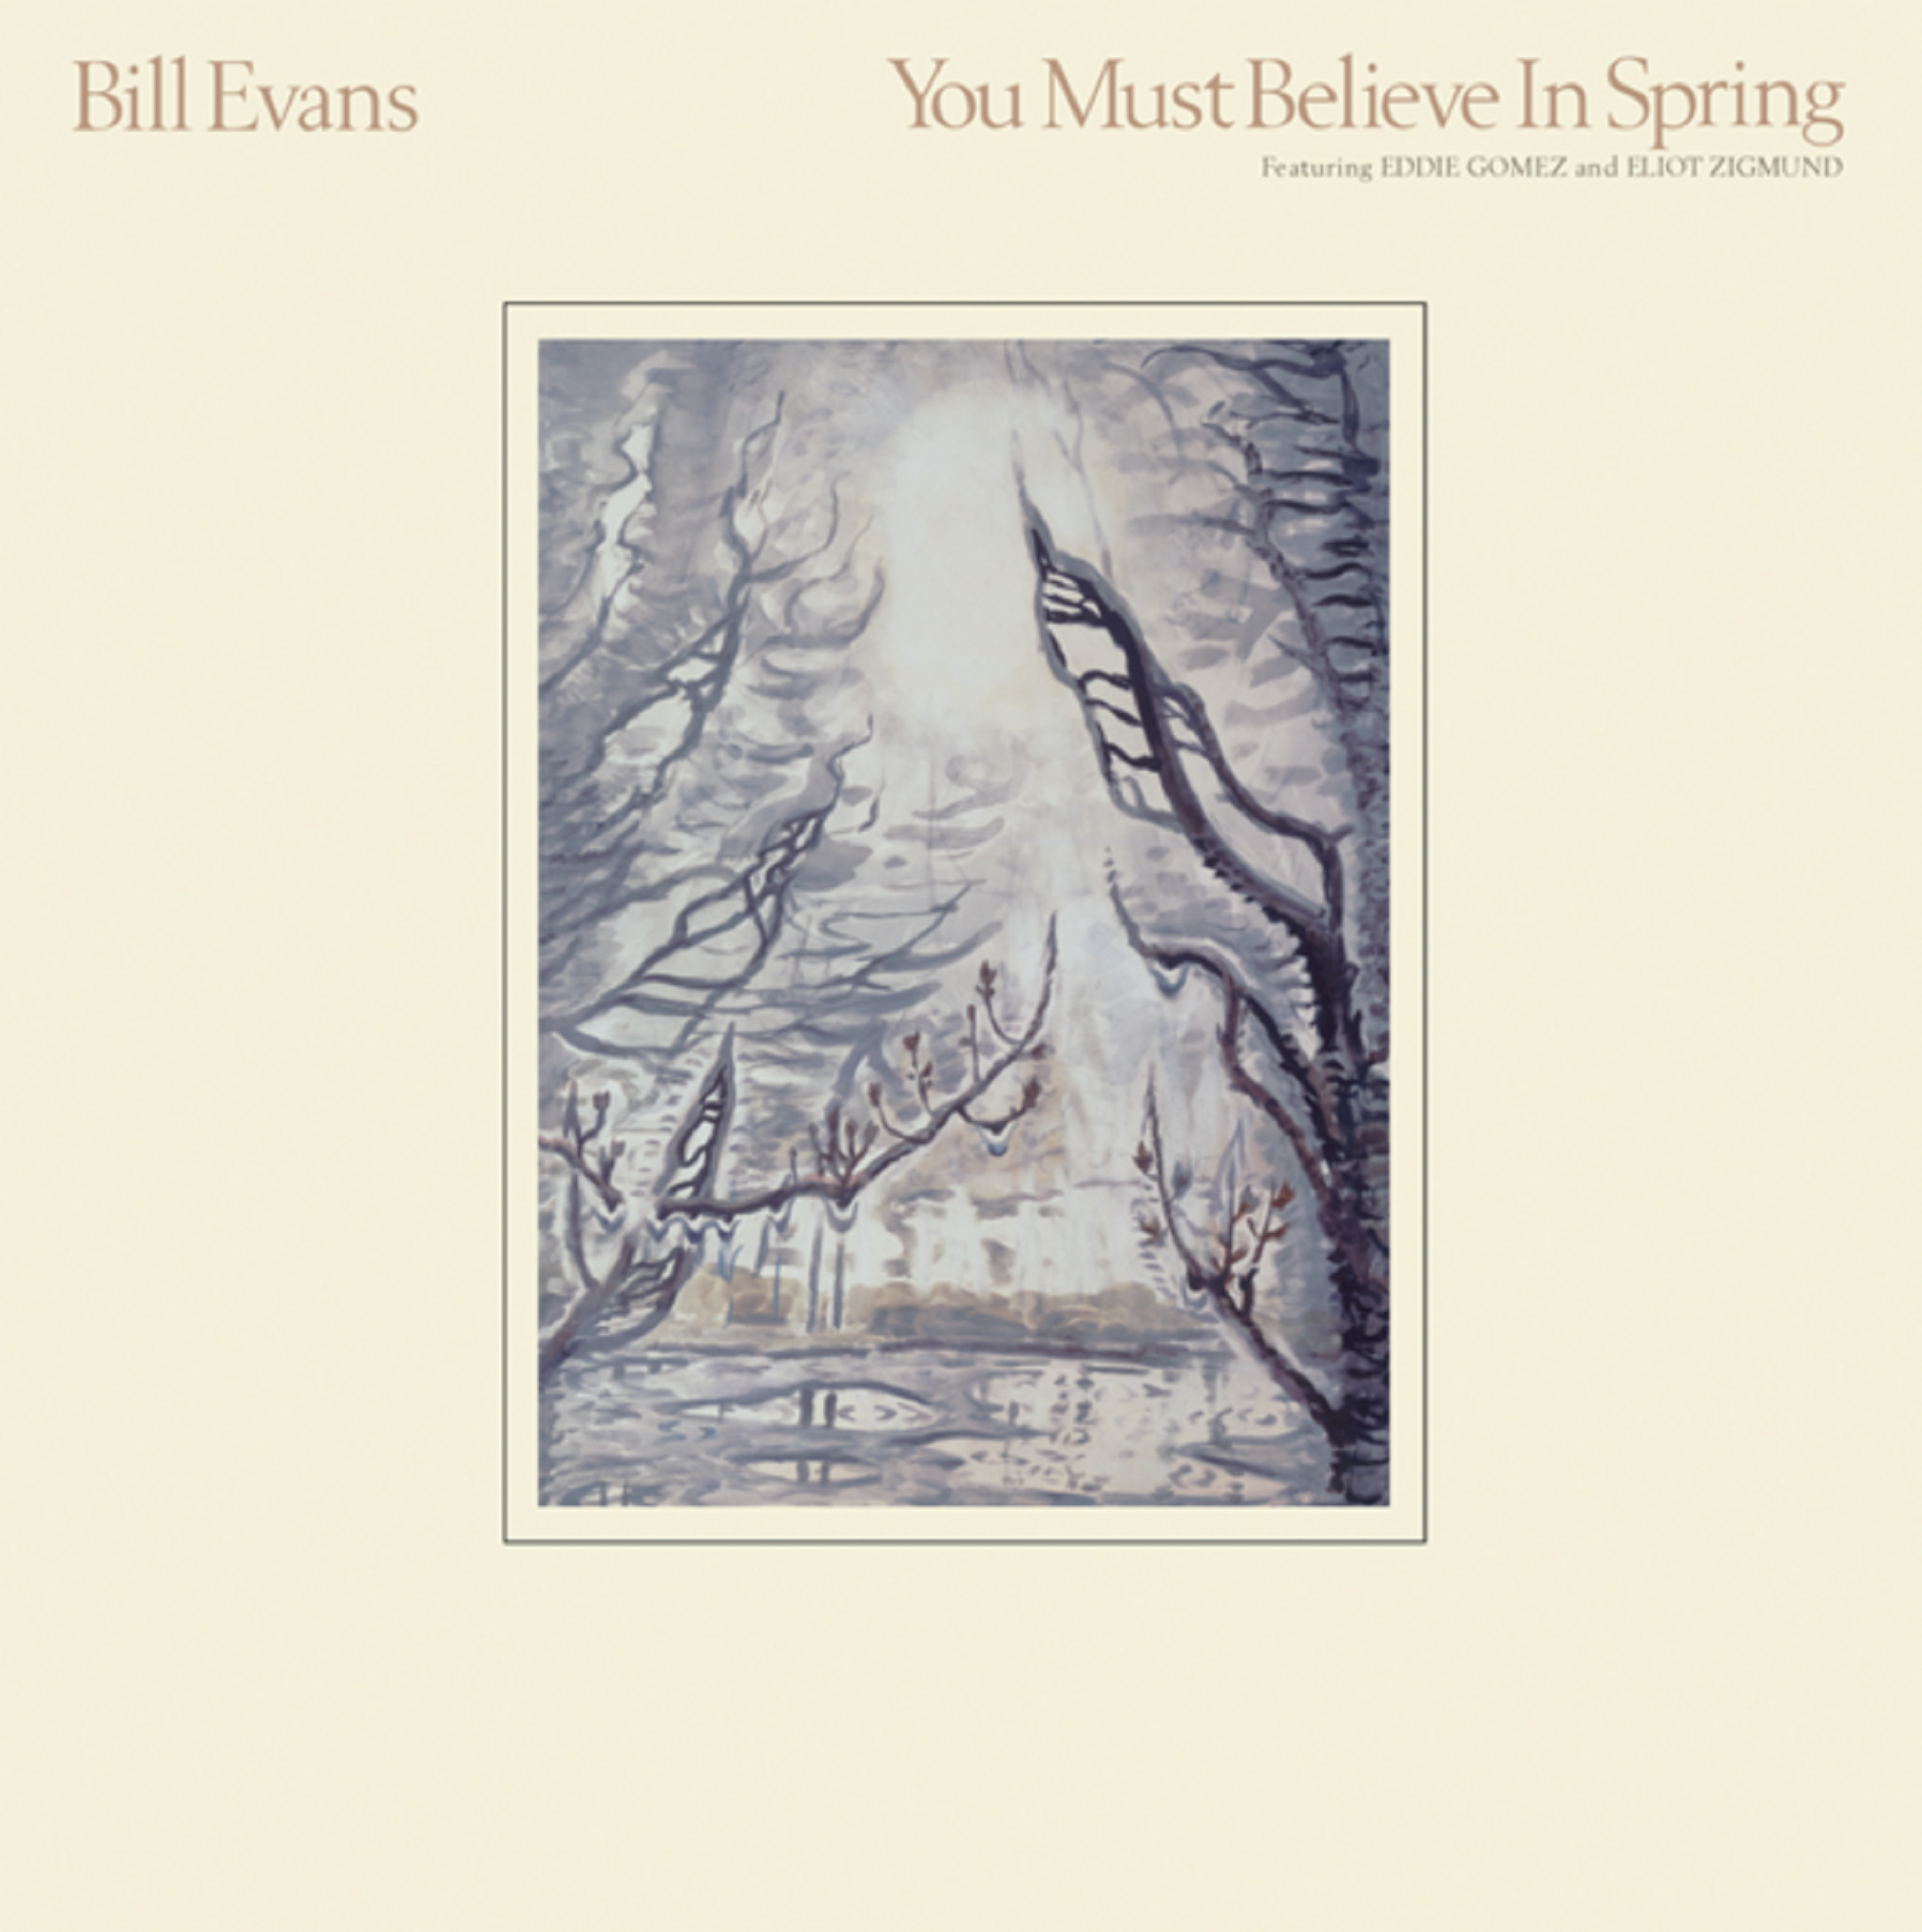 BILL EVANS’ POSTHUMOUS TOUR DE FORCE, YOU MUST BELIEVE IN SPRING, SET FOR REISSUE